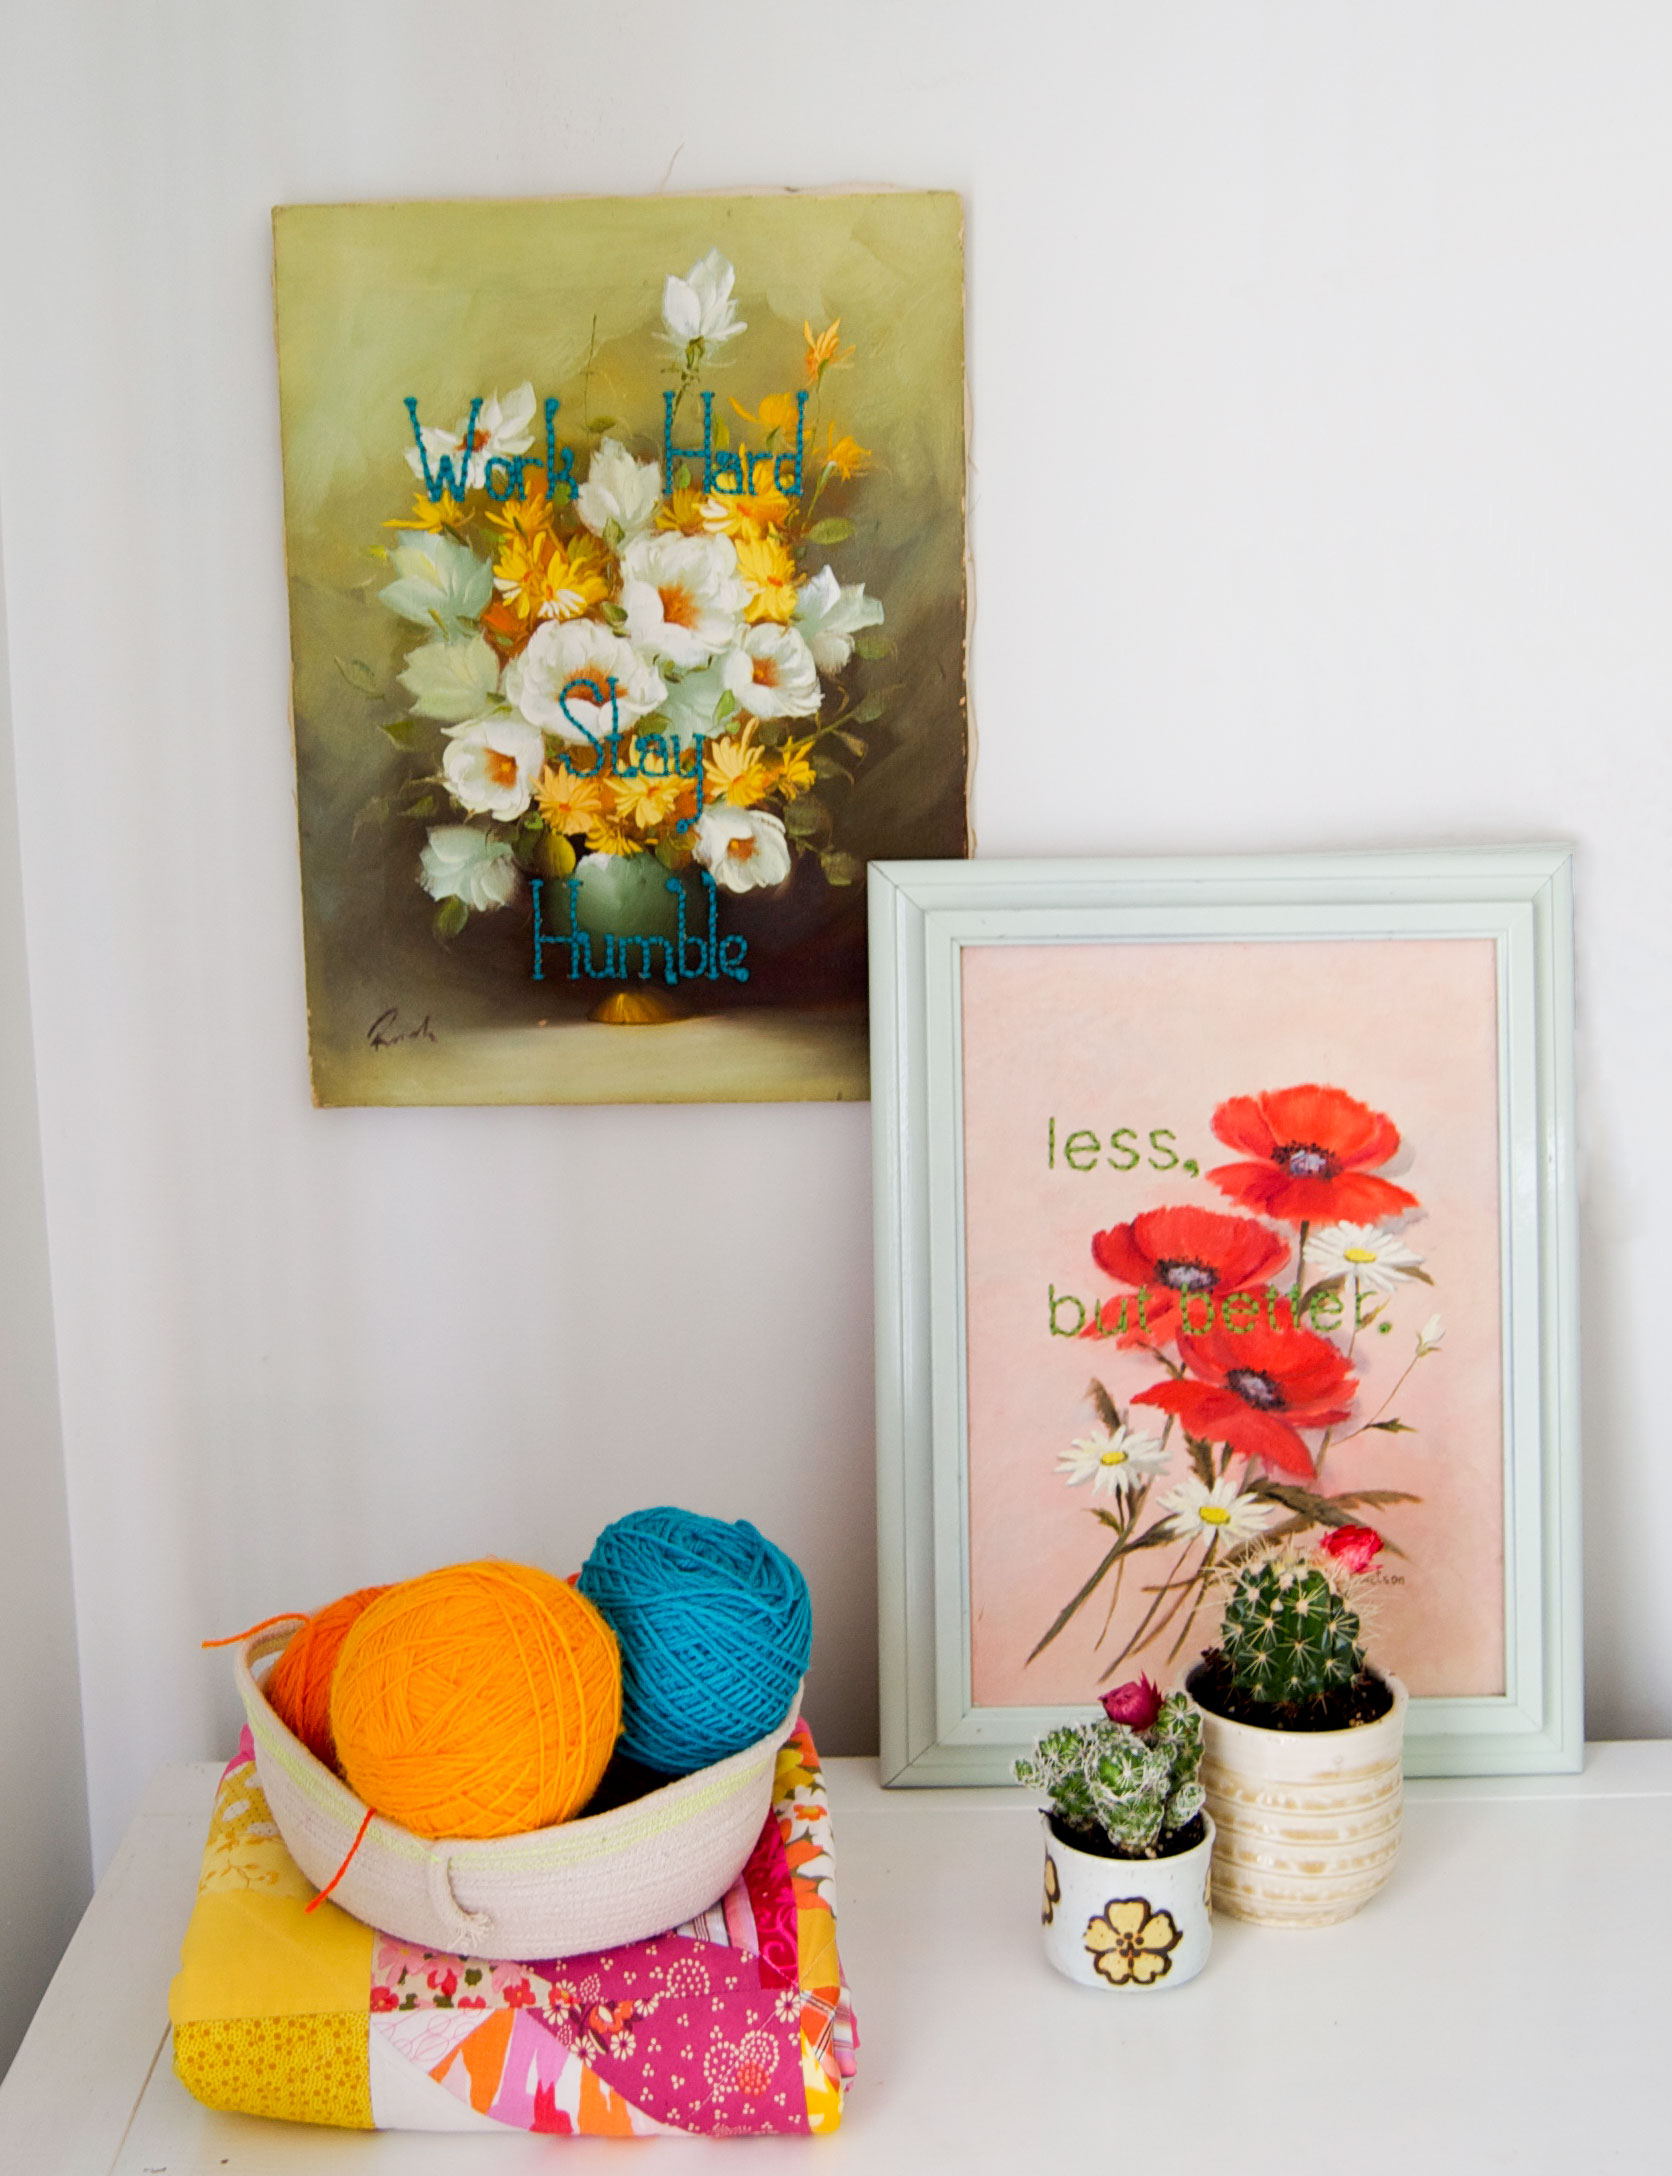 How to Create DIY Art by Painting Over a Thrifted Canvas. - Savvy